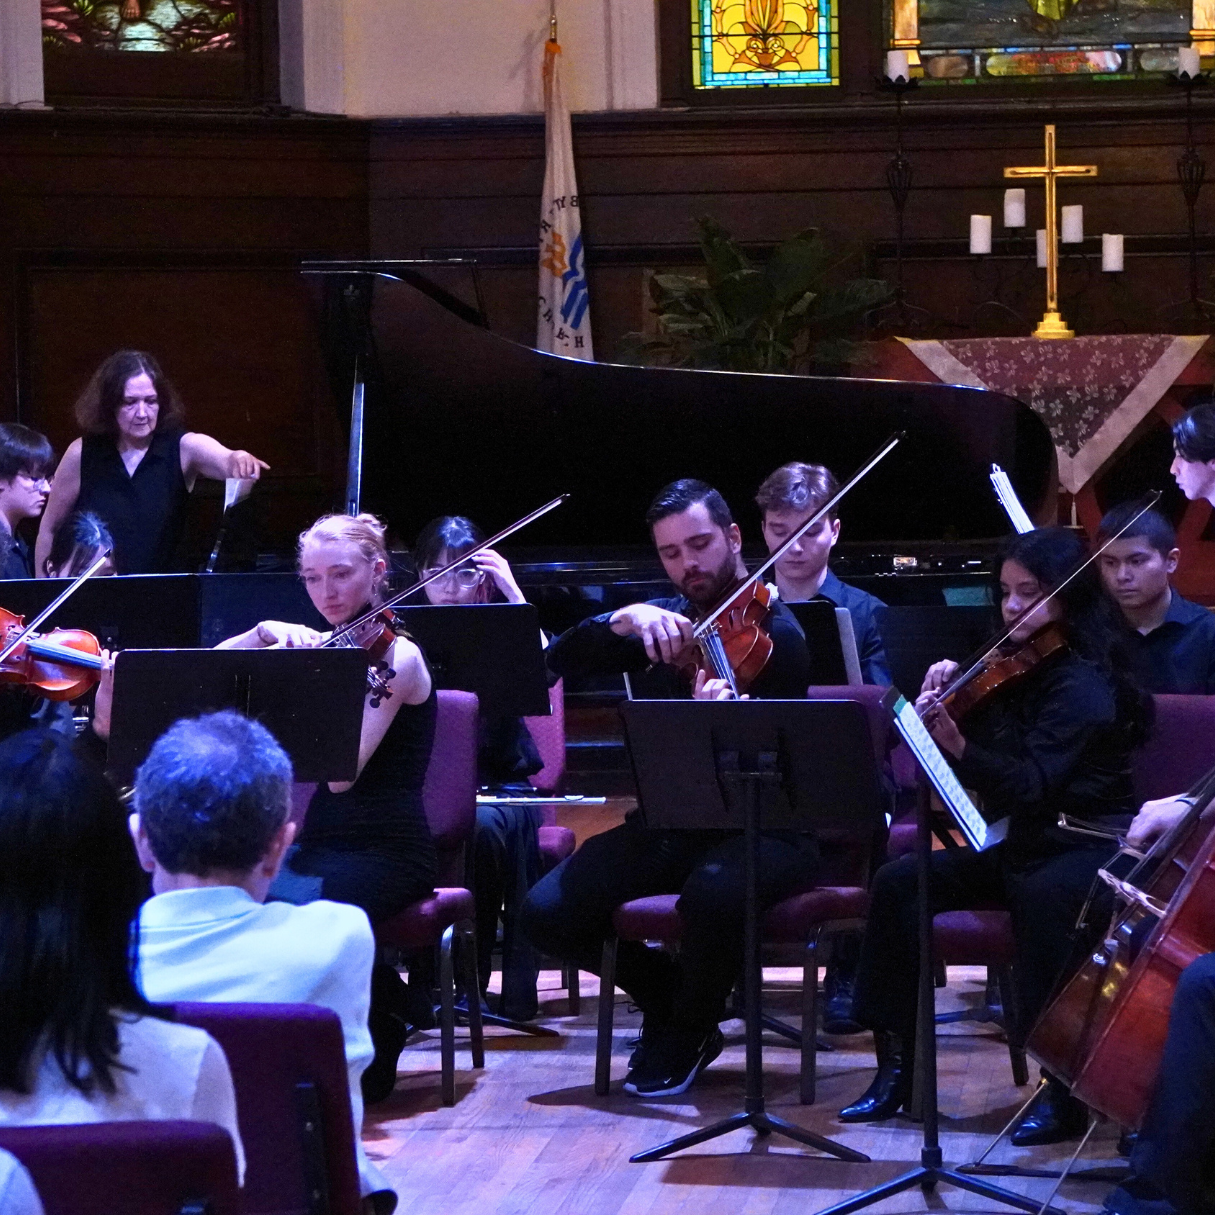 an orchestra playing a classical piece of music, including violins, woodwinds, cello, piano, and percussion